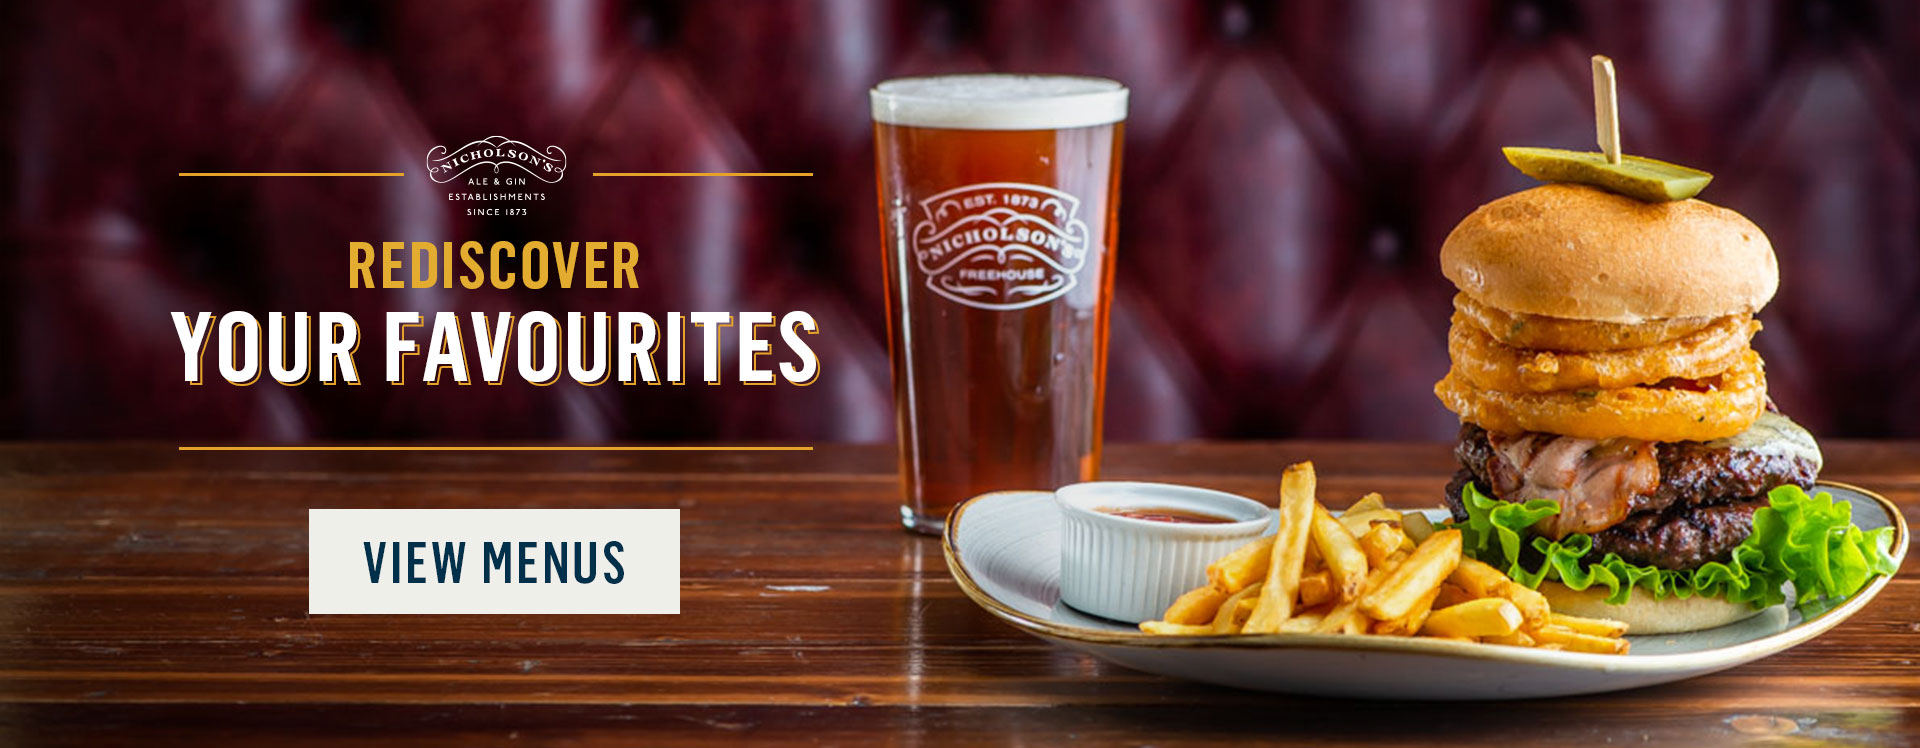 Rediscover your favourites at Williamson's Tavern